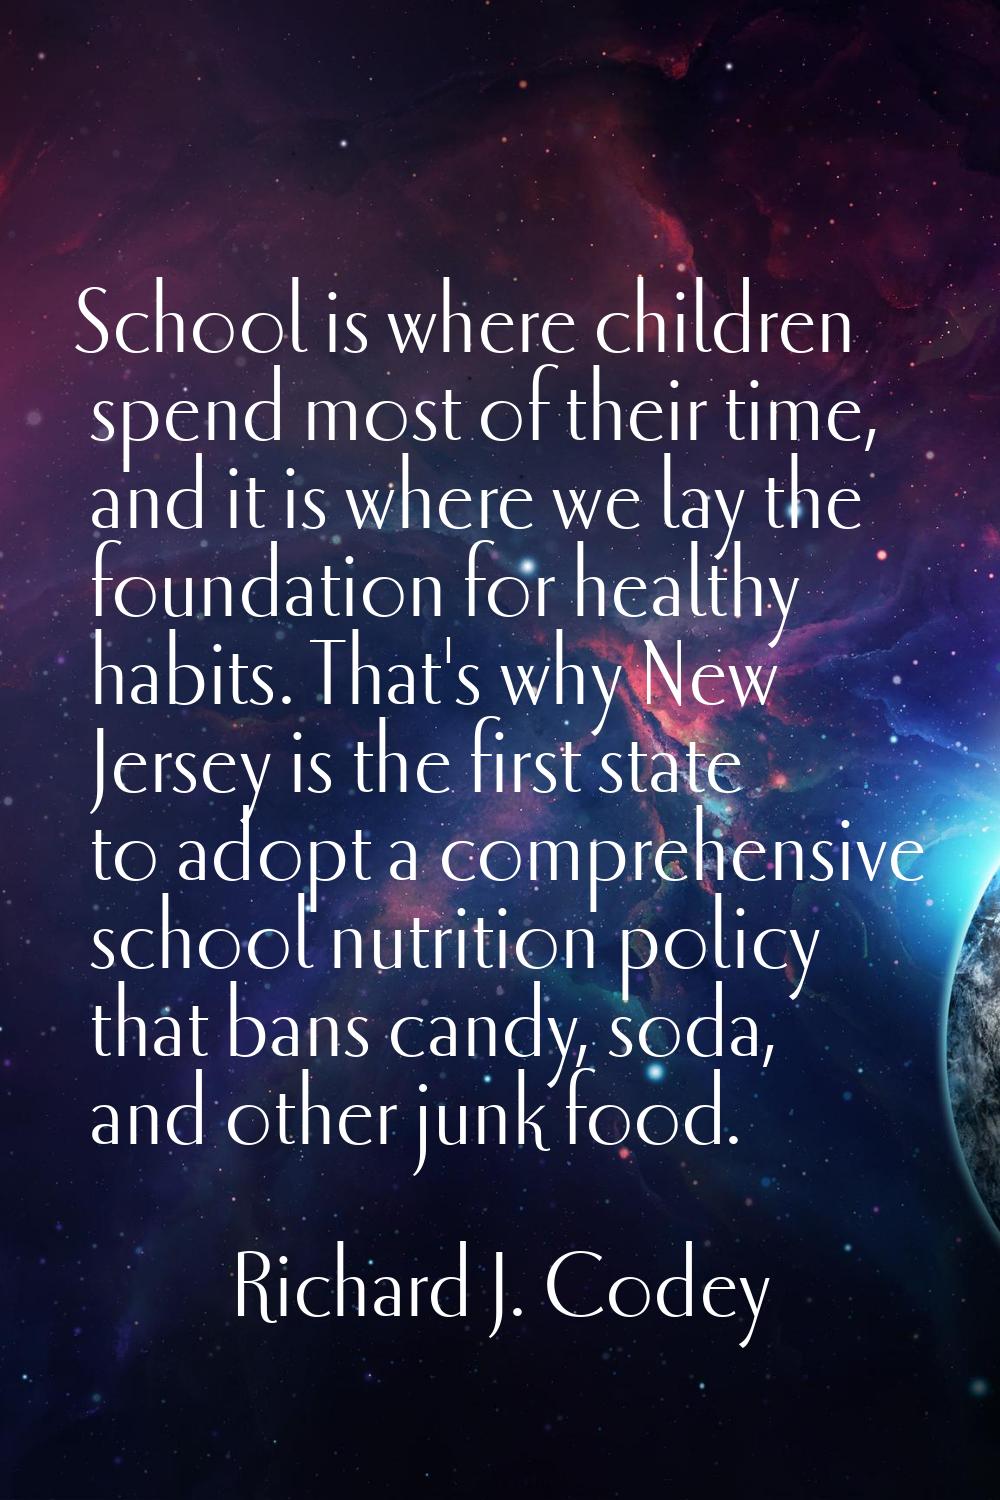 School is where children spend most of their time, and it is where we lay the foundation for health